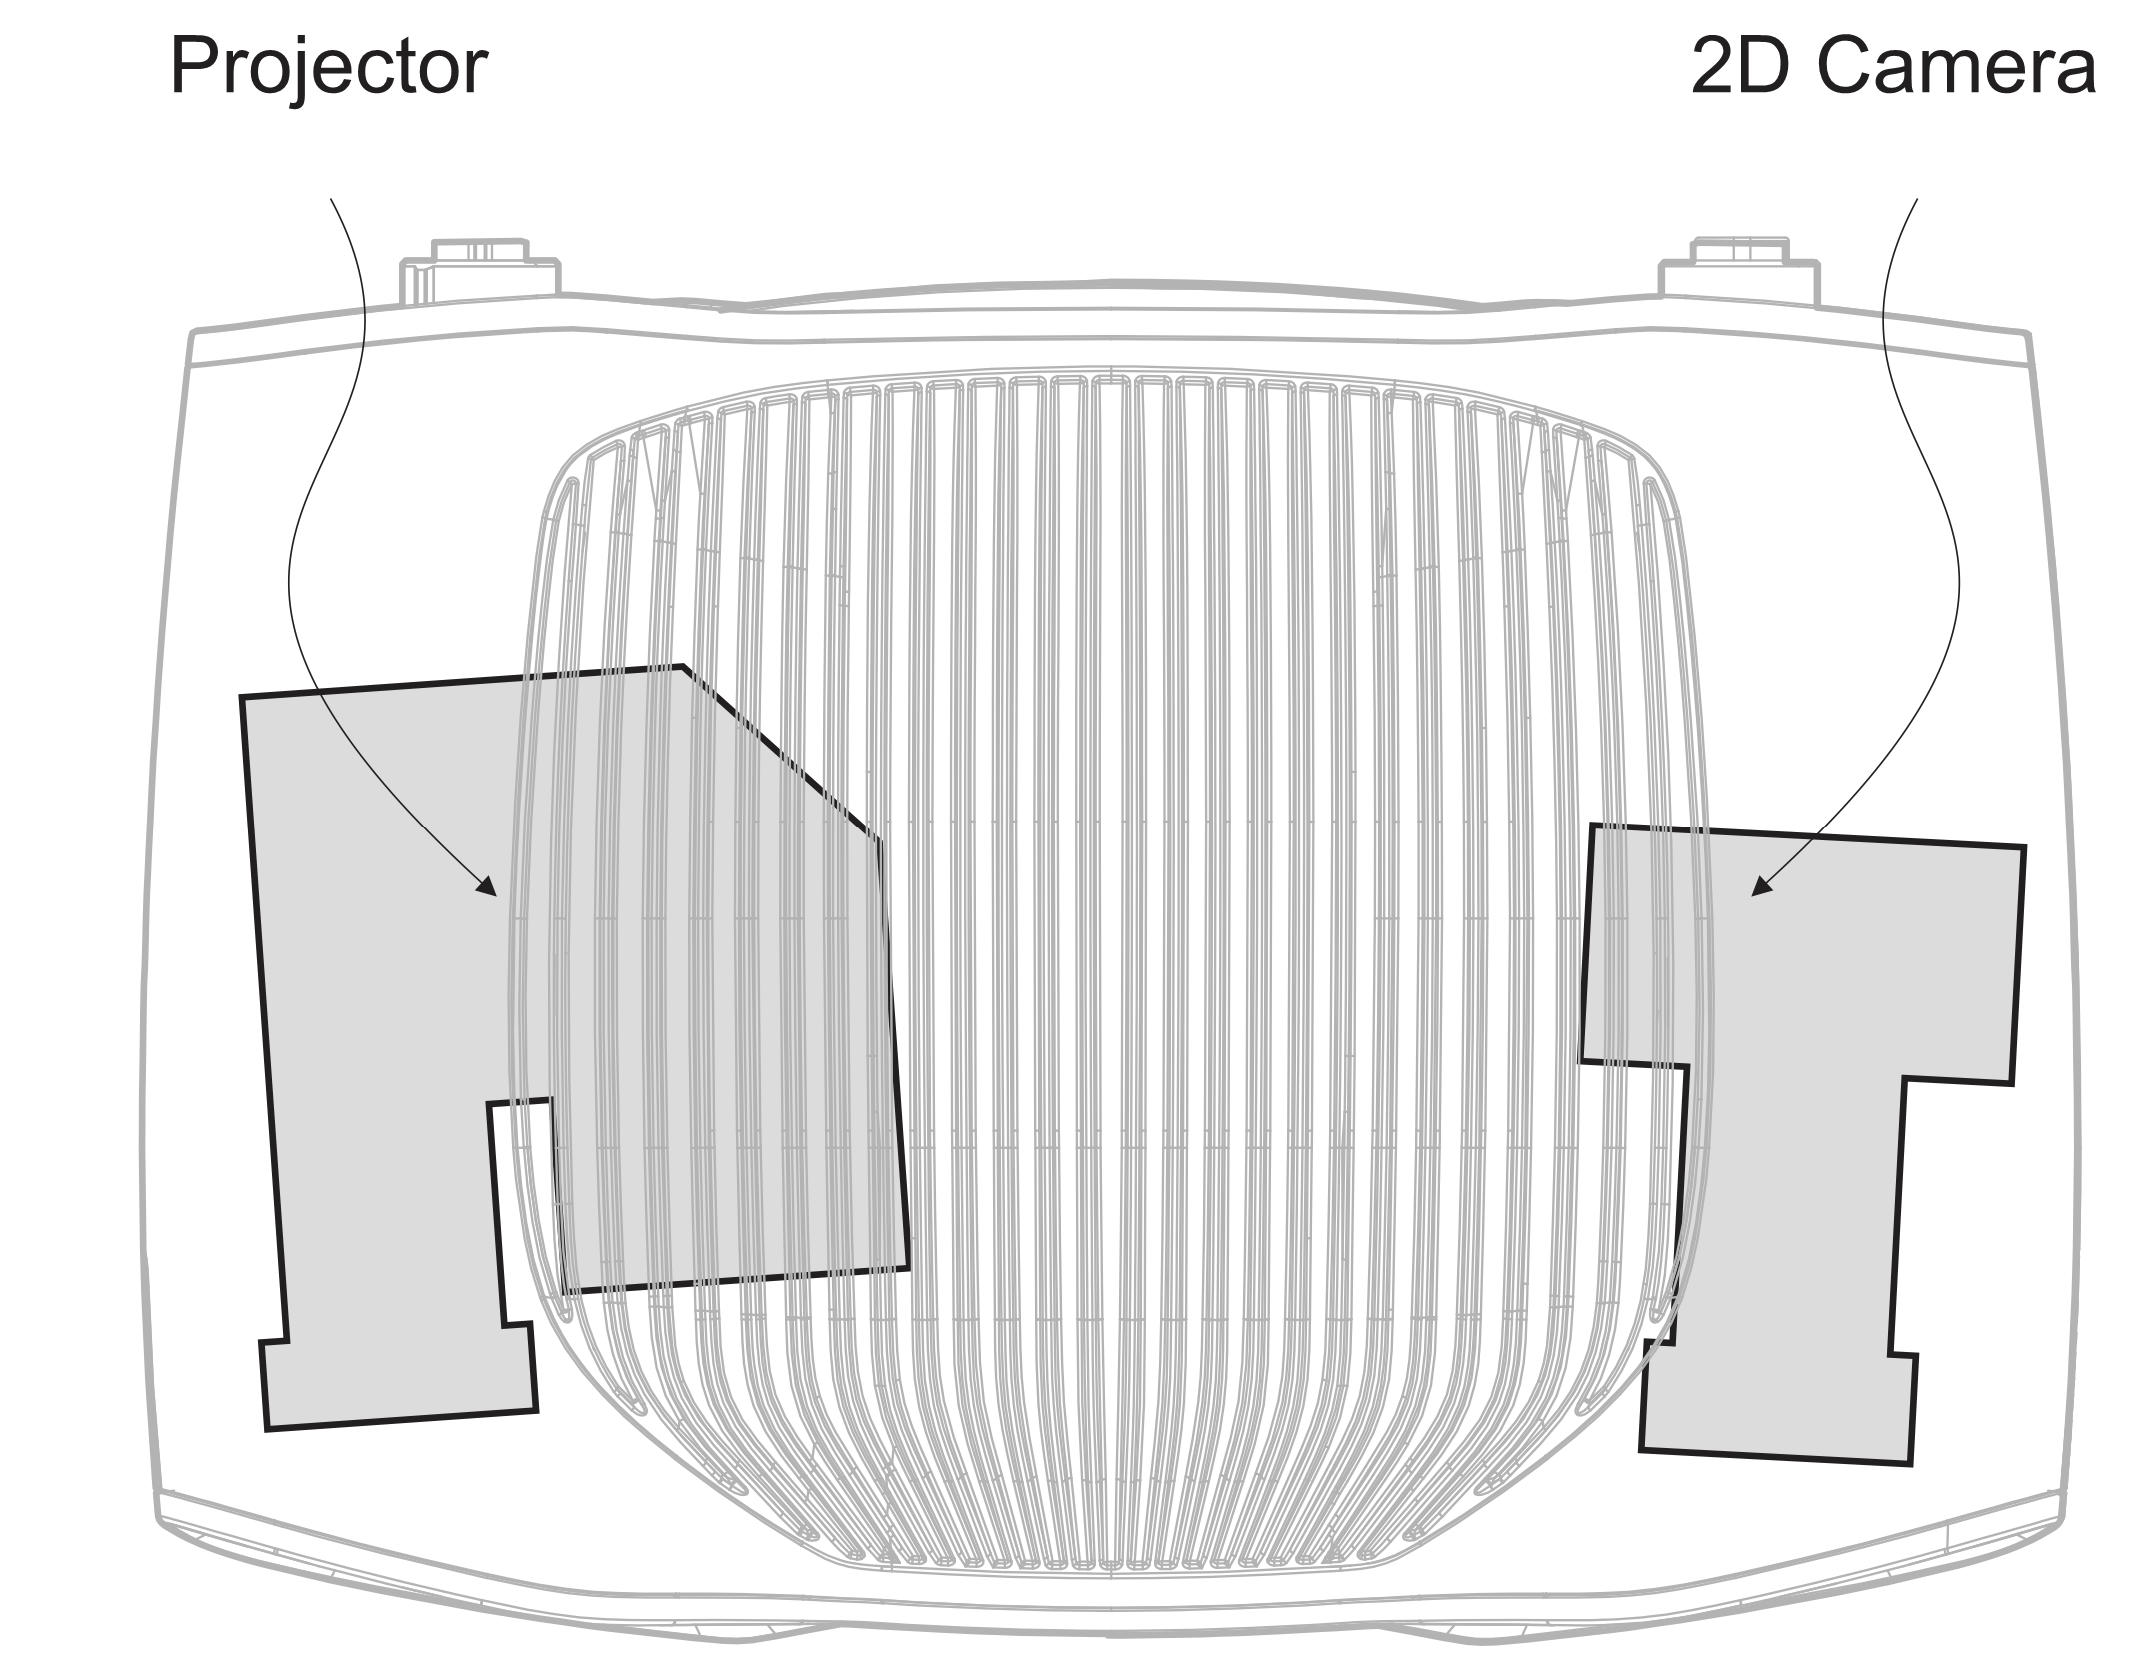 Sketch of where the projector and 2D camera are located.